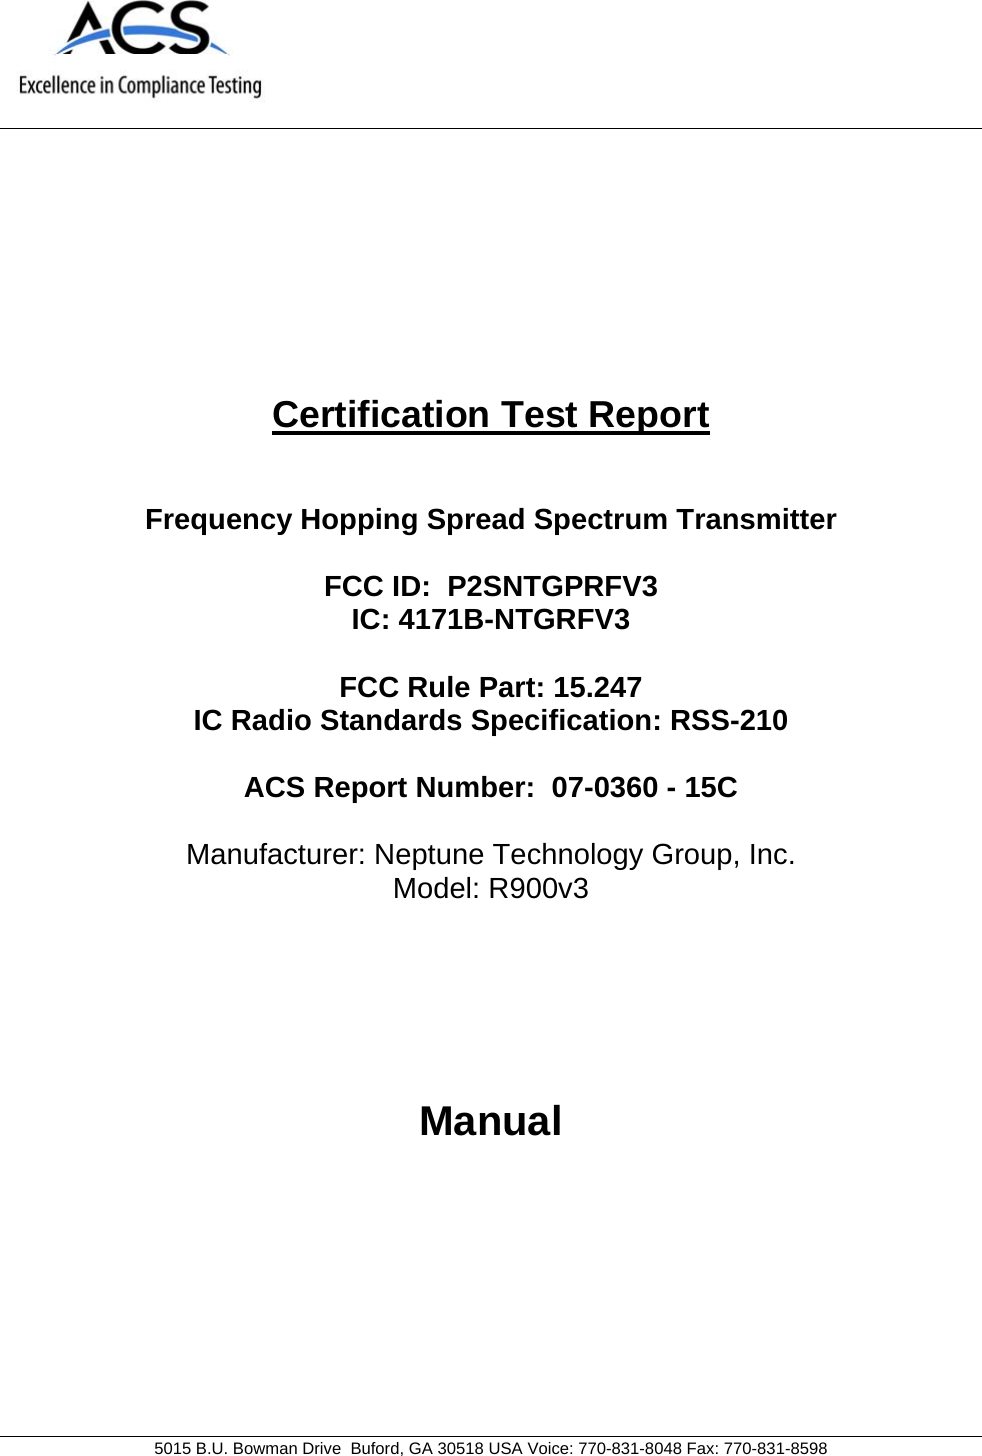     5015 B.U. Bowman Drive  Buford, GA 30518 USA Voice: 770-831-8048 Fax: 770-831-8598   Certification Test Report   Frequency Hopping Spread Spectrum Transmitter  FCC ID:  P2SNTGPRFV3 IC: 4171B-NTGRFV3  FCC Rule Part: 15.247 IC Radio Standards Specification: RSS-210  ACS Report Number:  07-0360 - 15C   Manufacturer: Neptune Technology Group, Inc. Model: R900v3     Manual  